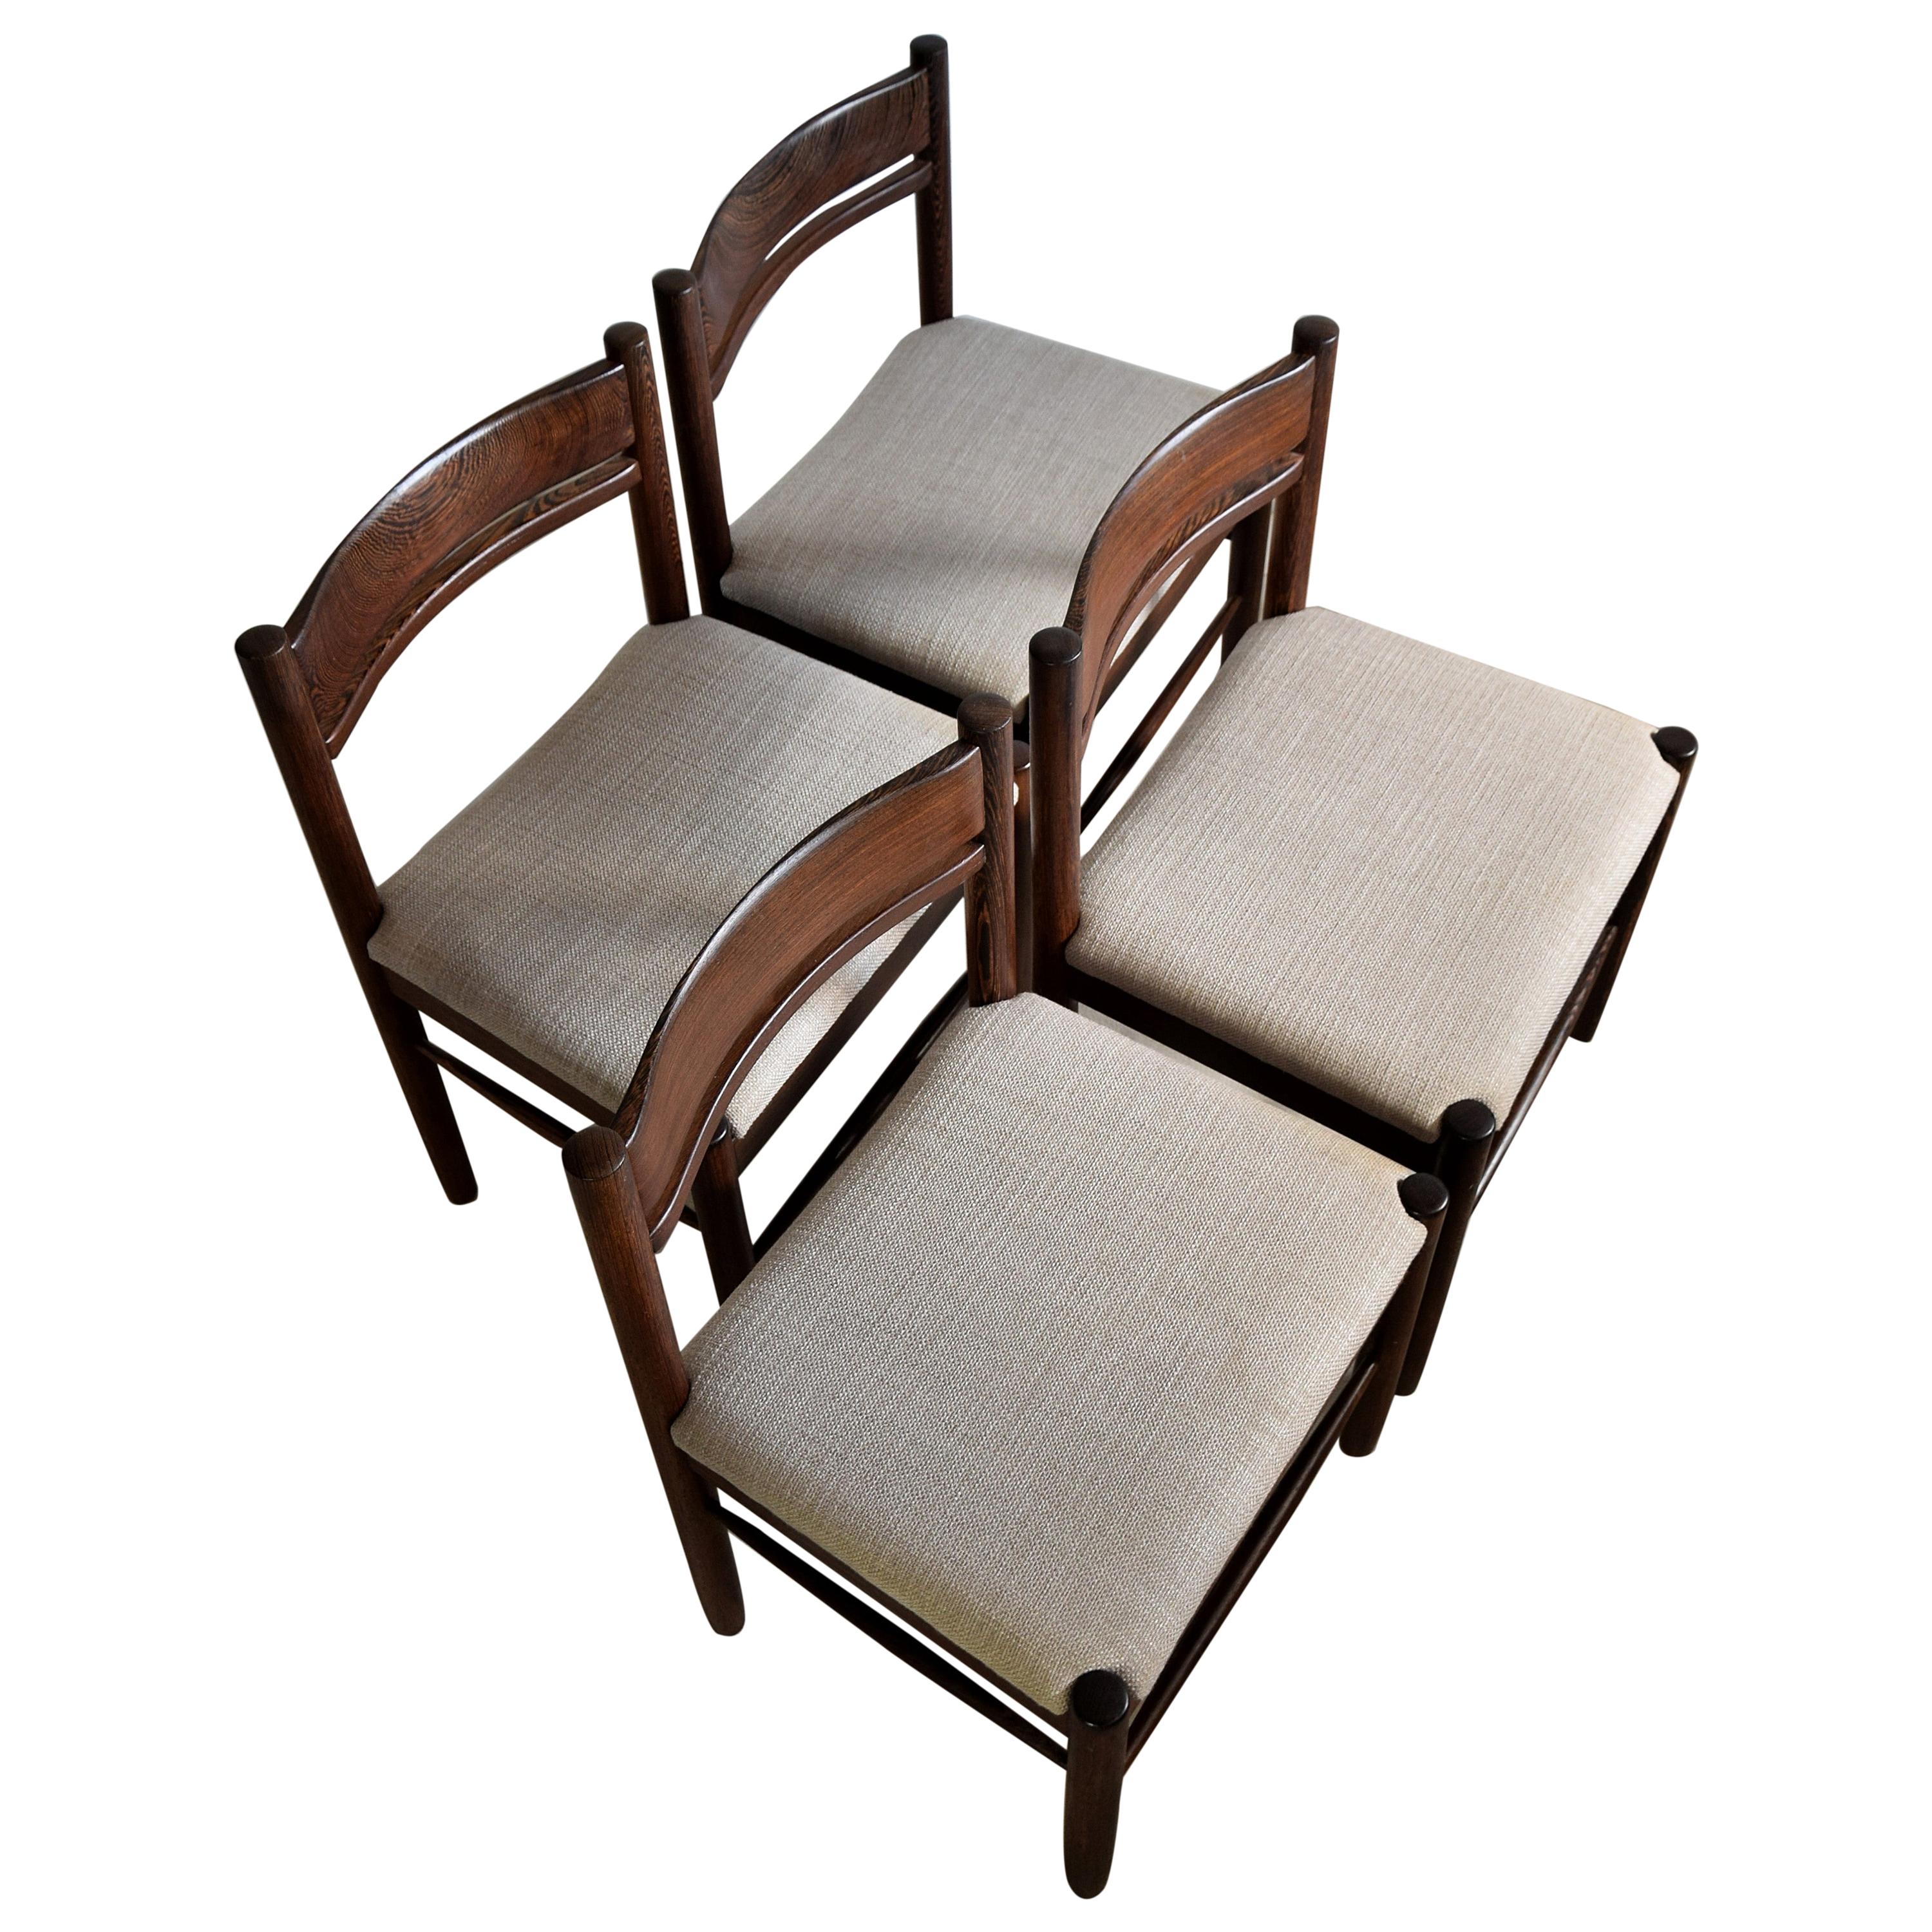 Four Solid Mid-Century Modern Wengé Dining Chairs